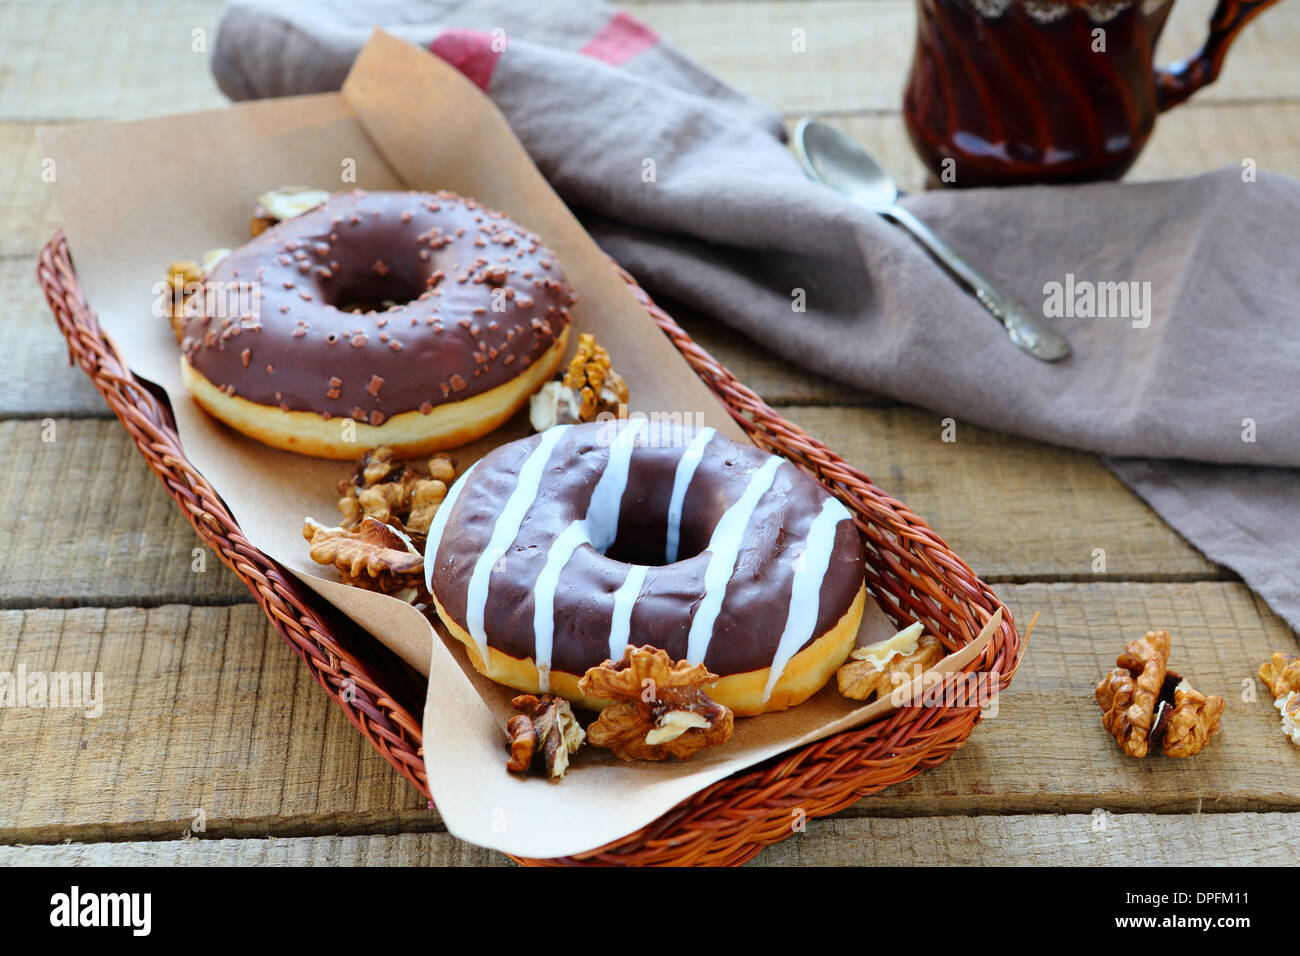 chocolate donuts for breakfast, food closeup Stock Photo